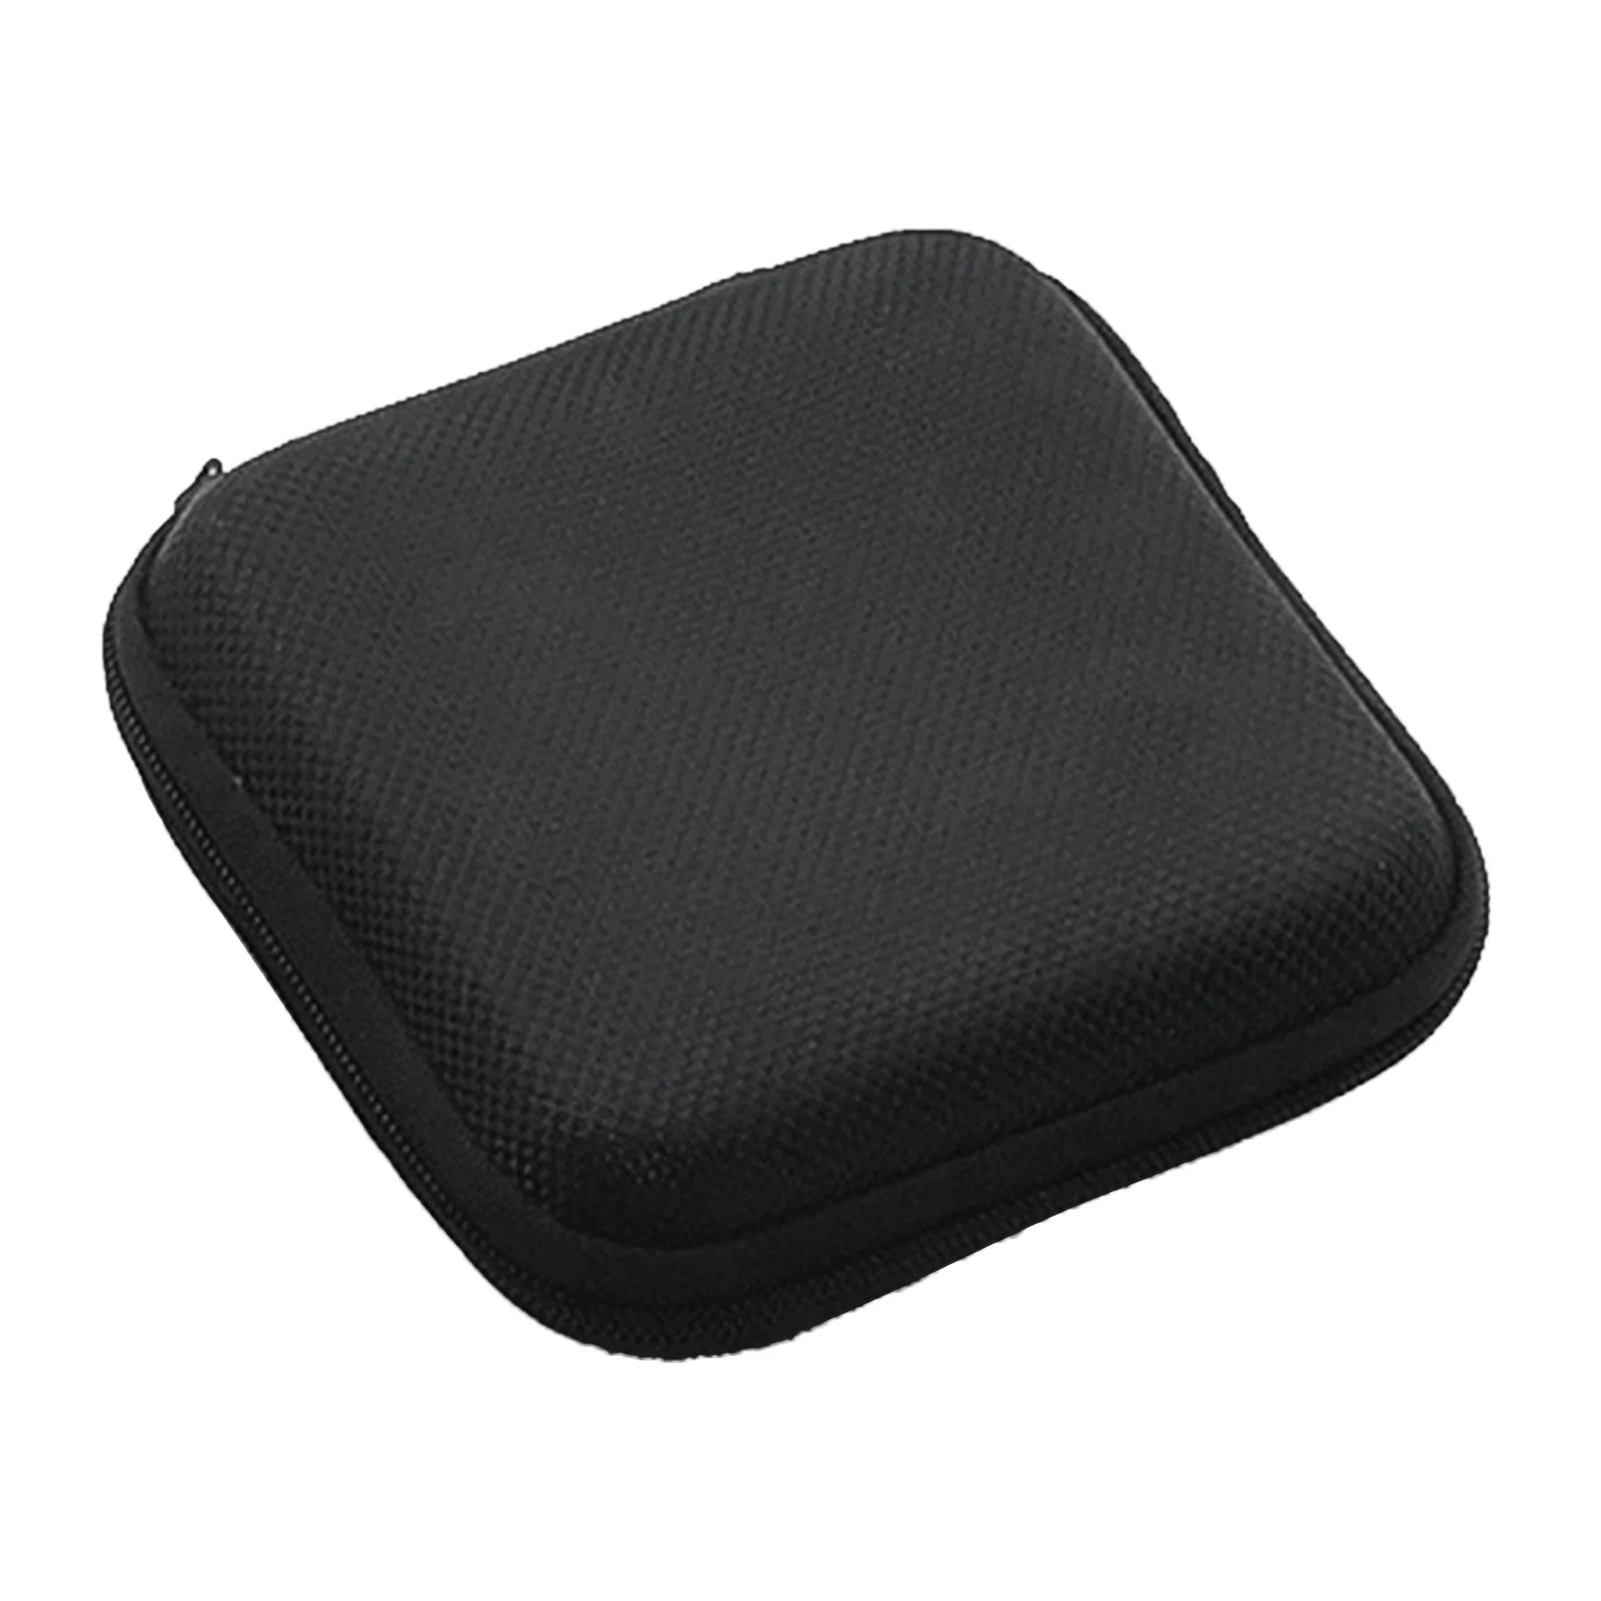 

Black Storage Bag High Quality EVA Protective Bag Carrying Case Protector For RG280V Game Console Accessories